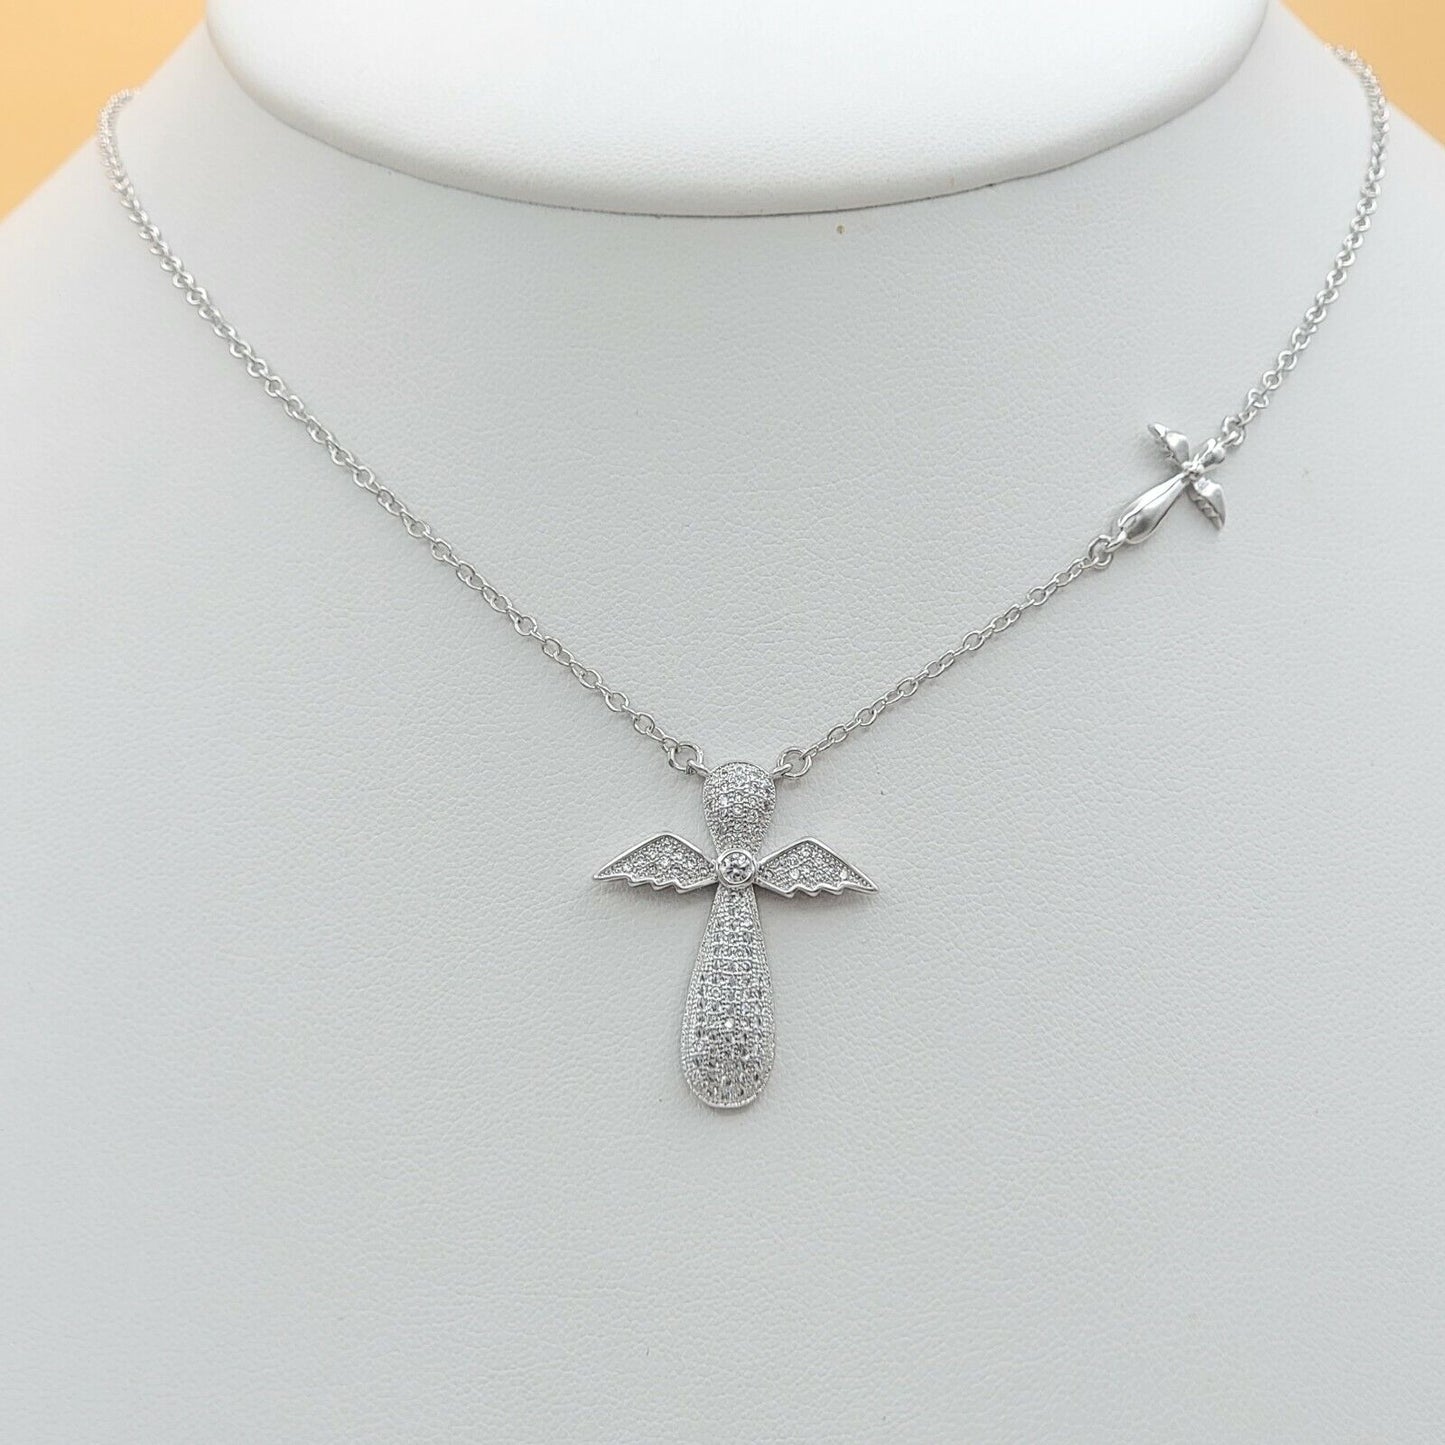 Necklaces - Rhodium Plated. Angel Wings Cross CZ Pendant & Chain.